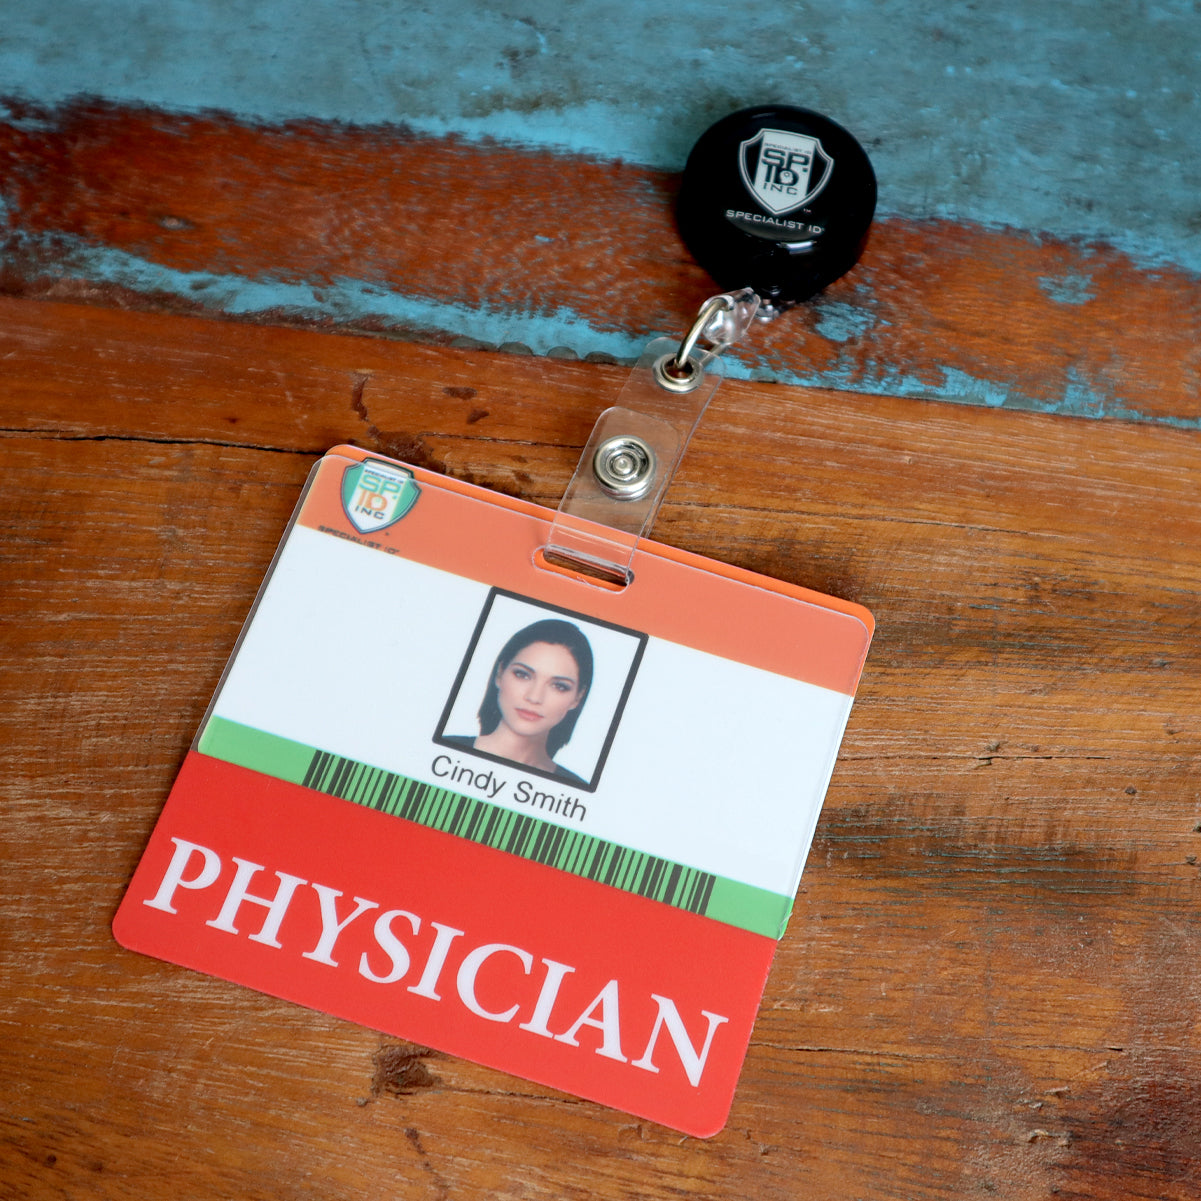 A Clear PHYSICIAN Badge Buddy - Horizontal ID Badge Backer for Physicians - Double Sided Print displaying a photo with the name "Cindy Smith" and the word "PHYSICIAN" in bold red letters, framed by a red color border, lies on a wooden surface with a retractable badge holder attached.